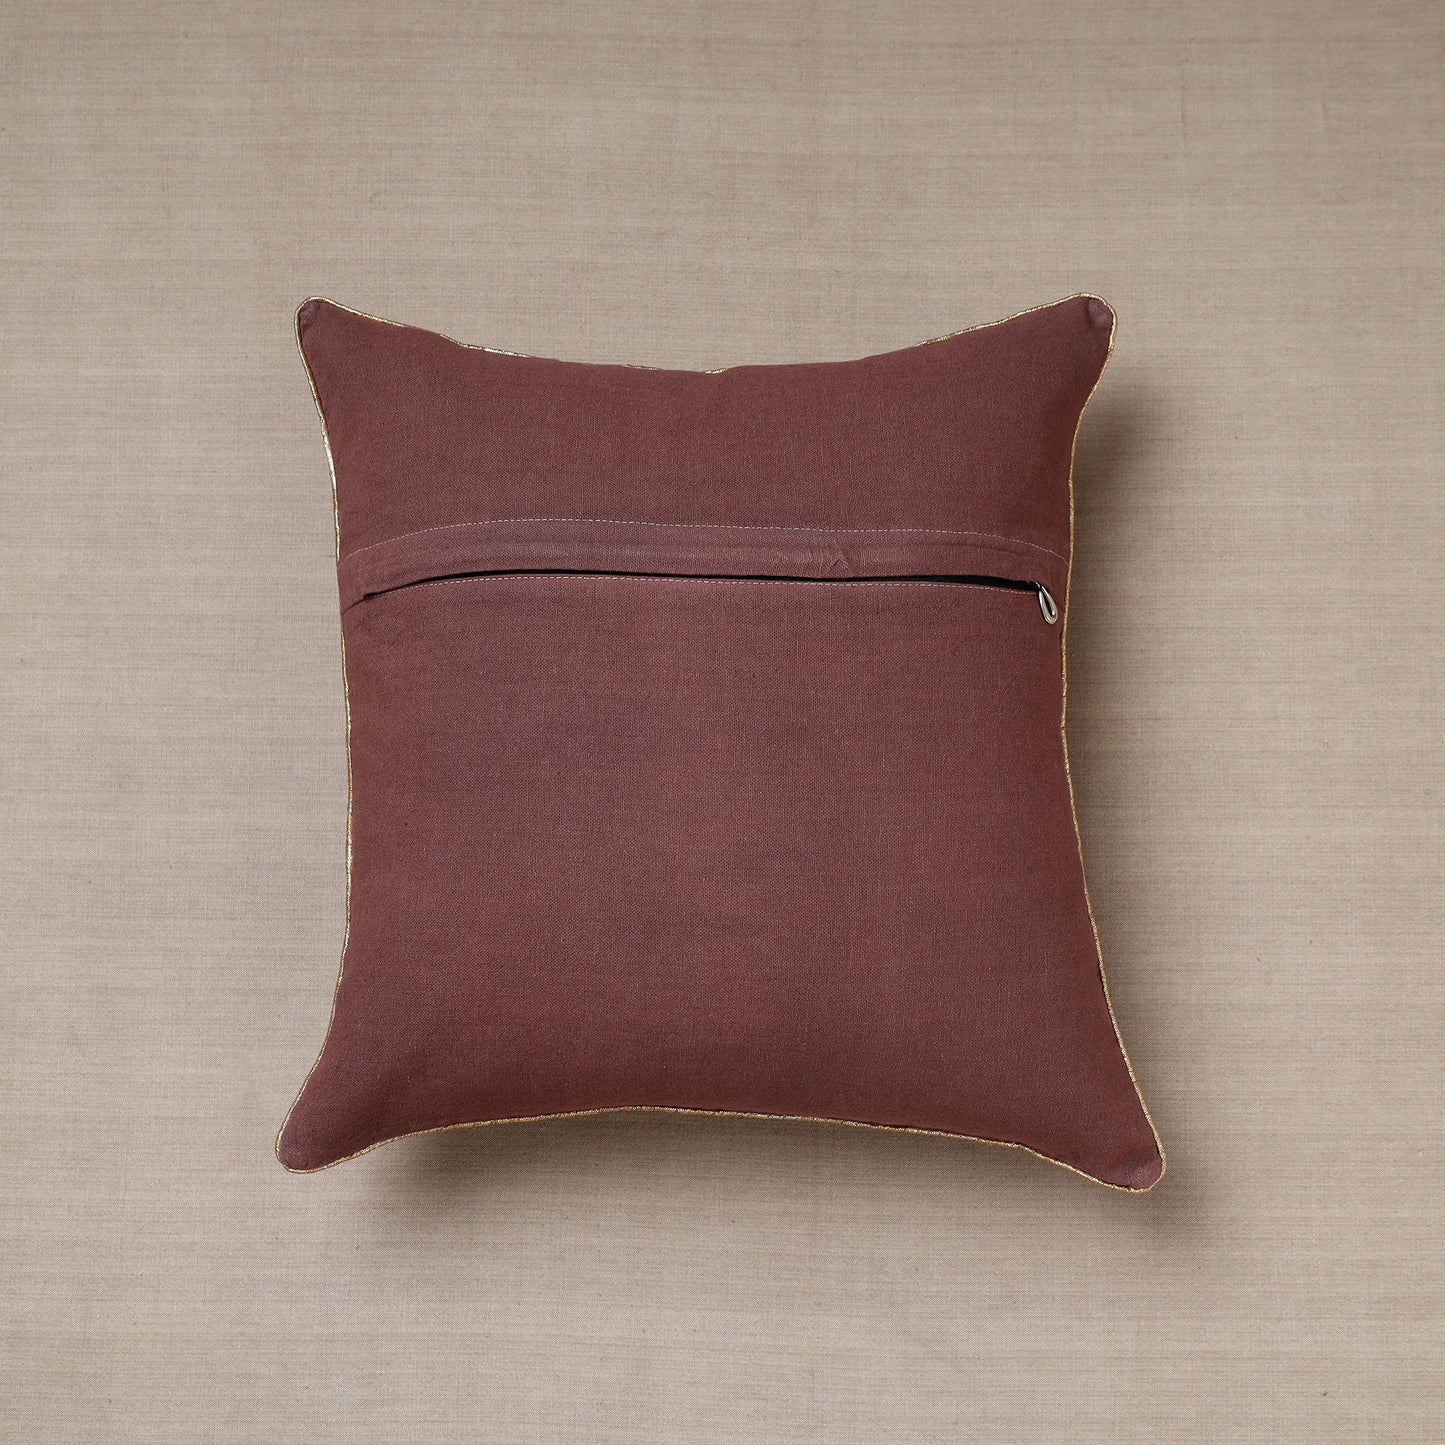 Purple - Soof Embroidery Cotton Cushion Cover (16 x 16 in)